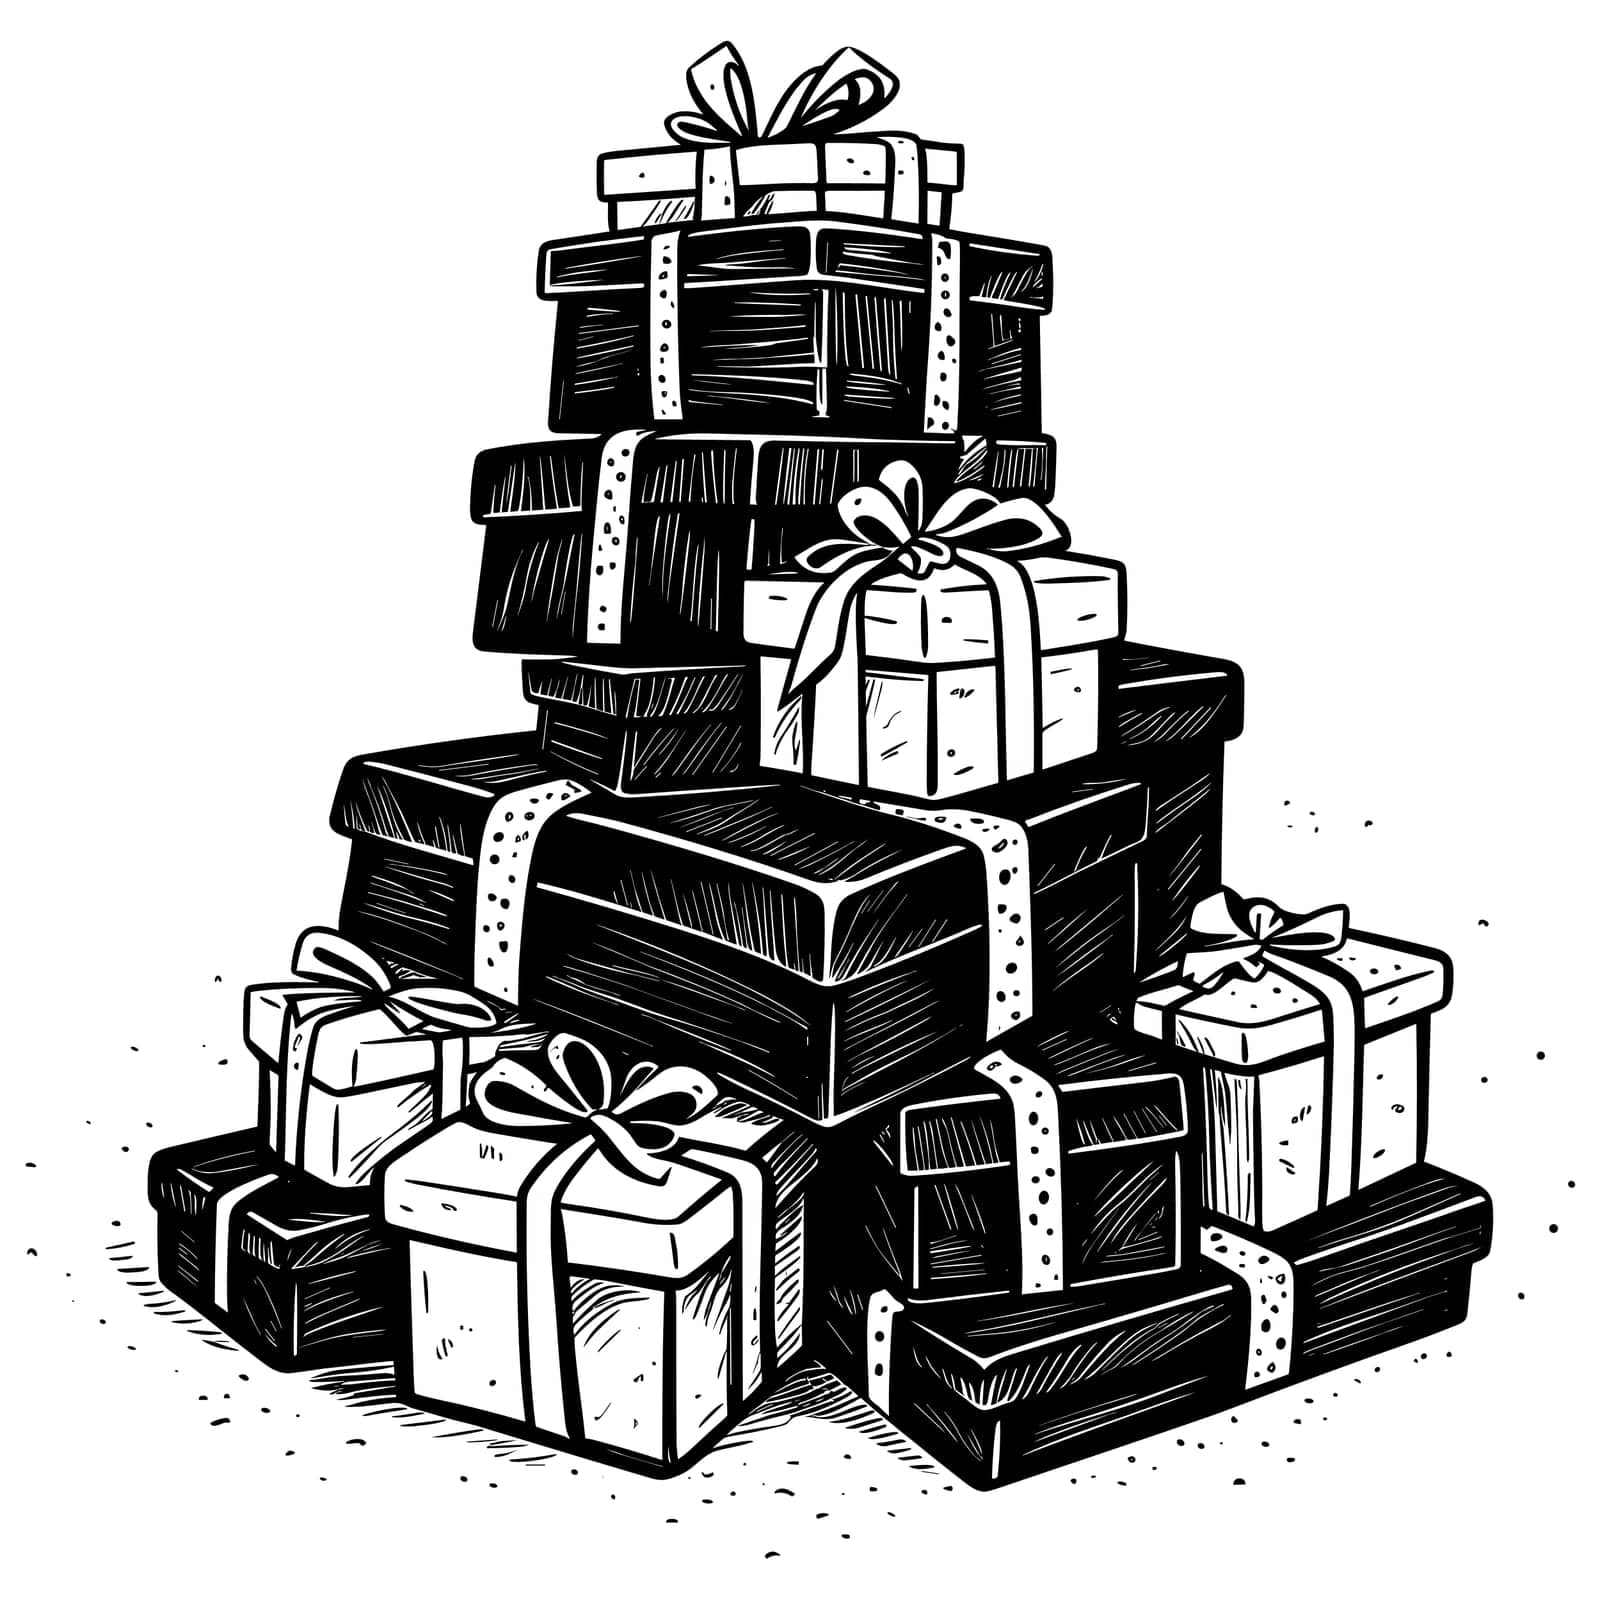 Pile of Gifts by Malchev